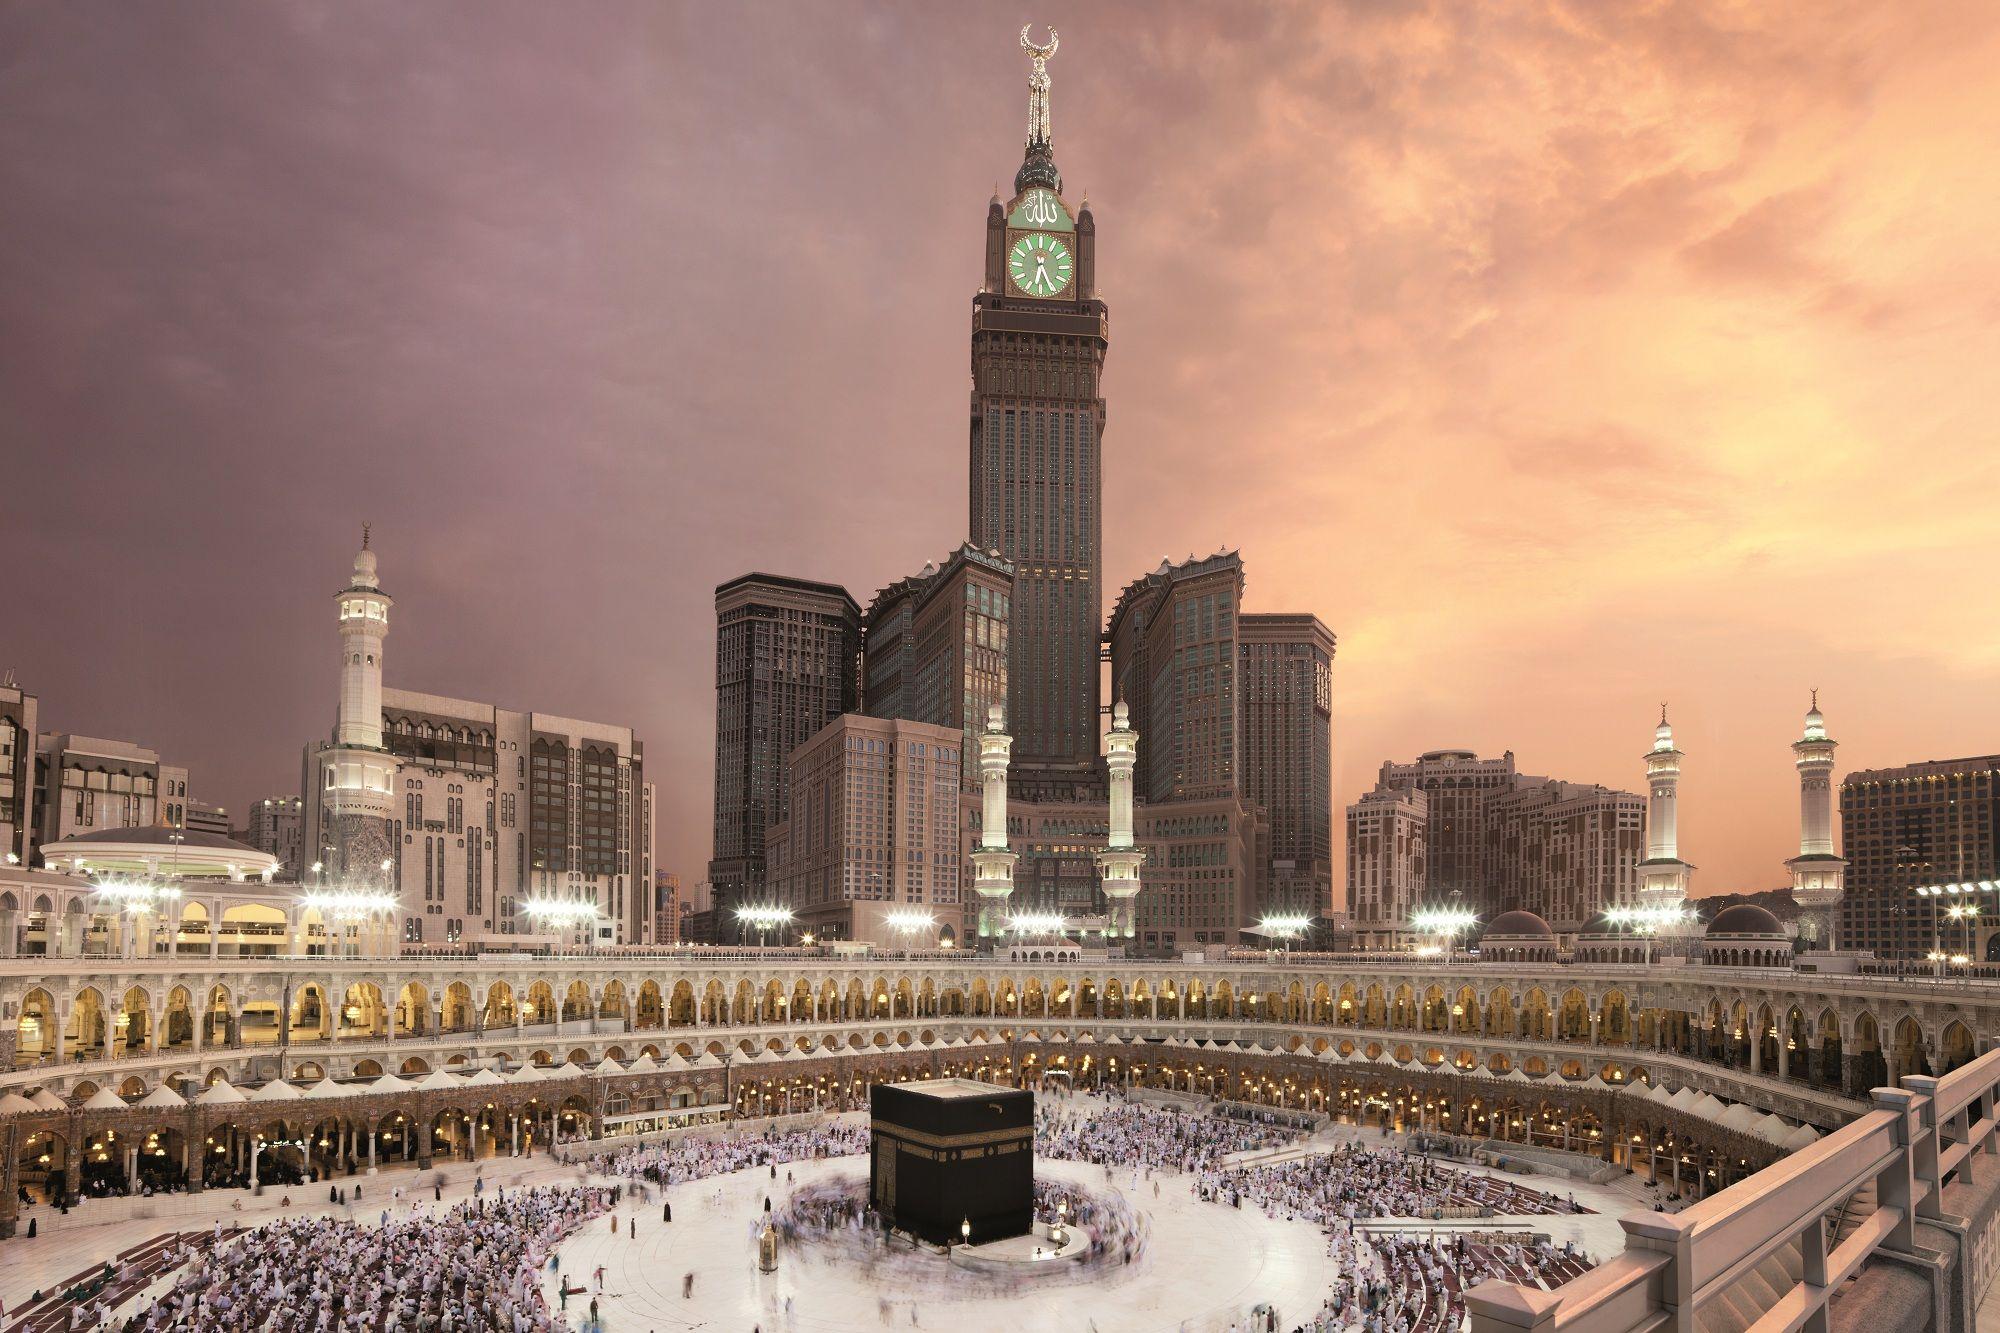 Awesome Collection: Makkah Royal Clock Tower Hotel Wallpaper, HDQ